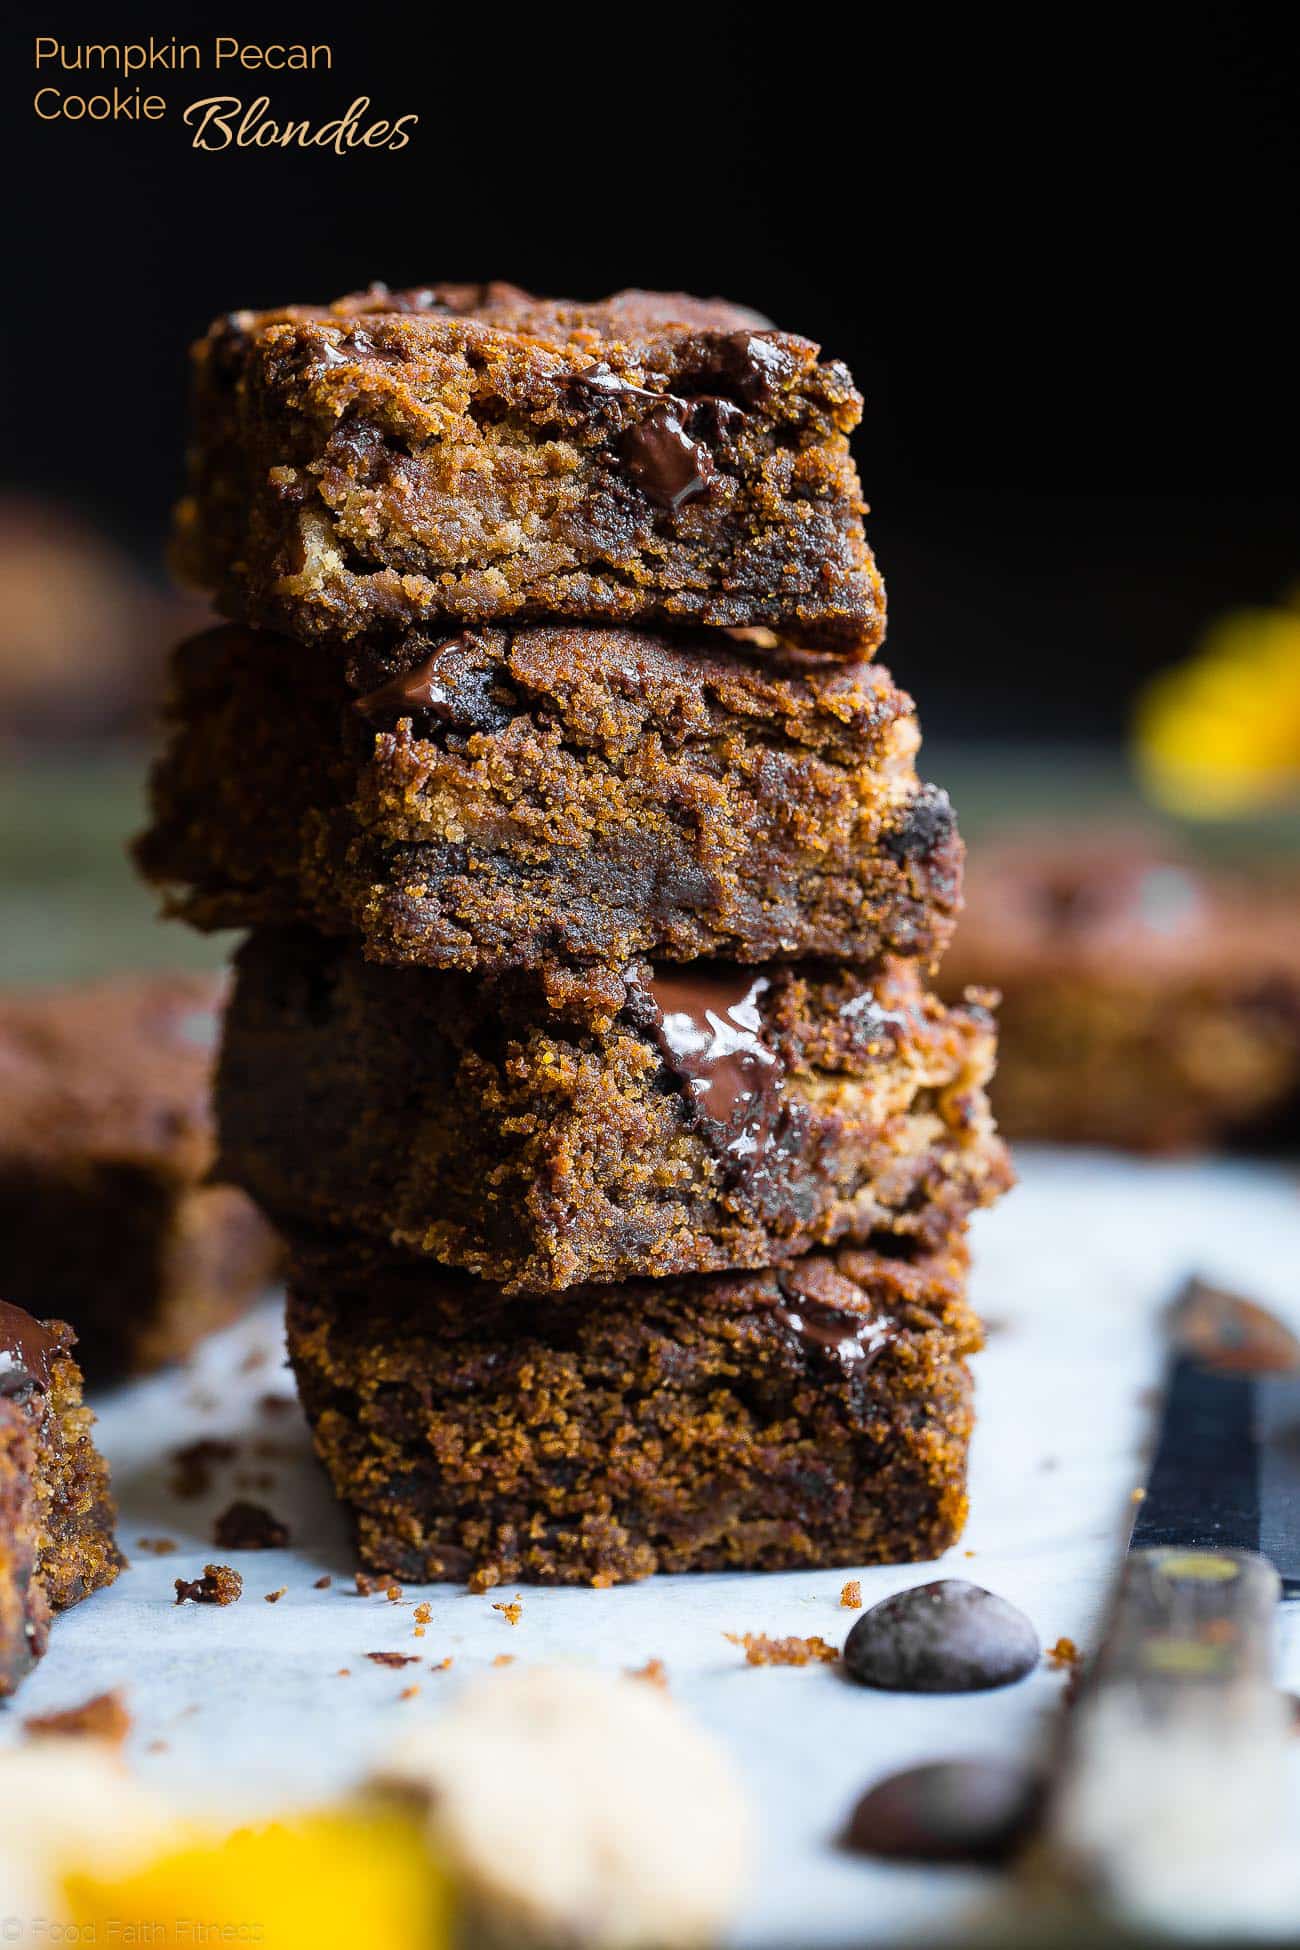 Cookie Stuffed Pumpkin Blondies - Cookies are baked right inside these healthier pumpkin brookies! They're so dense and chewy you'll never know they're gluten and dairy free! | Foodfaithfitness.com | @FoodFaithFit